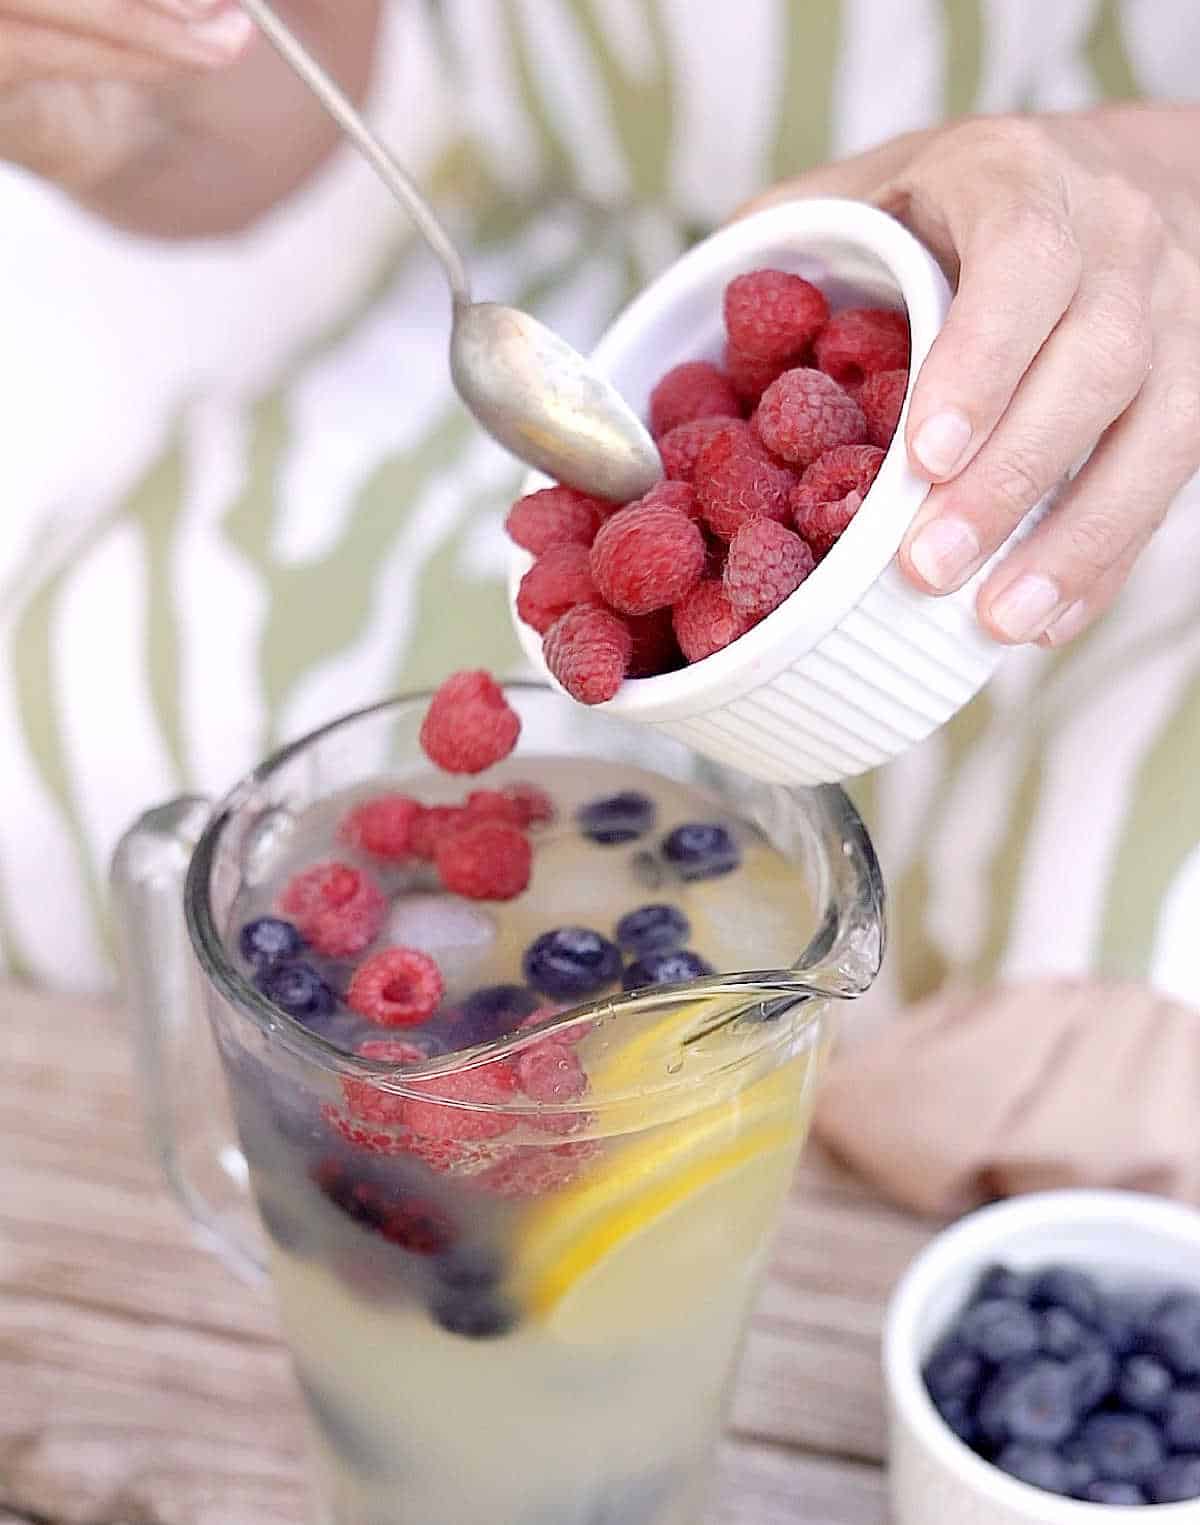 Adding fresh berries from a white to a lemonade pitcher. Green and white background.